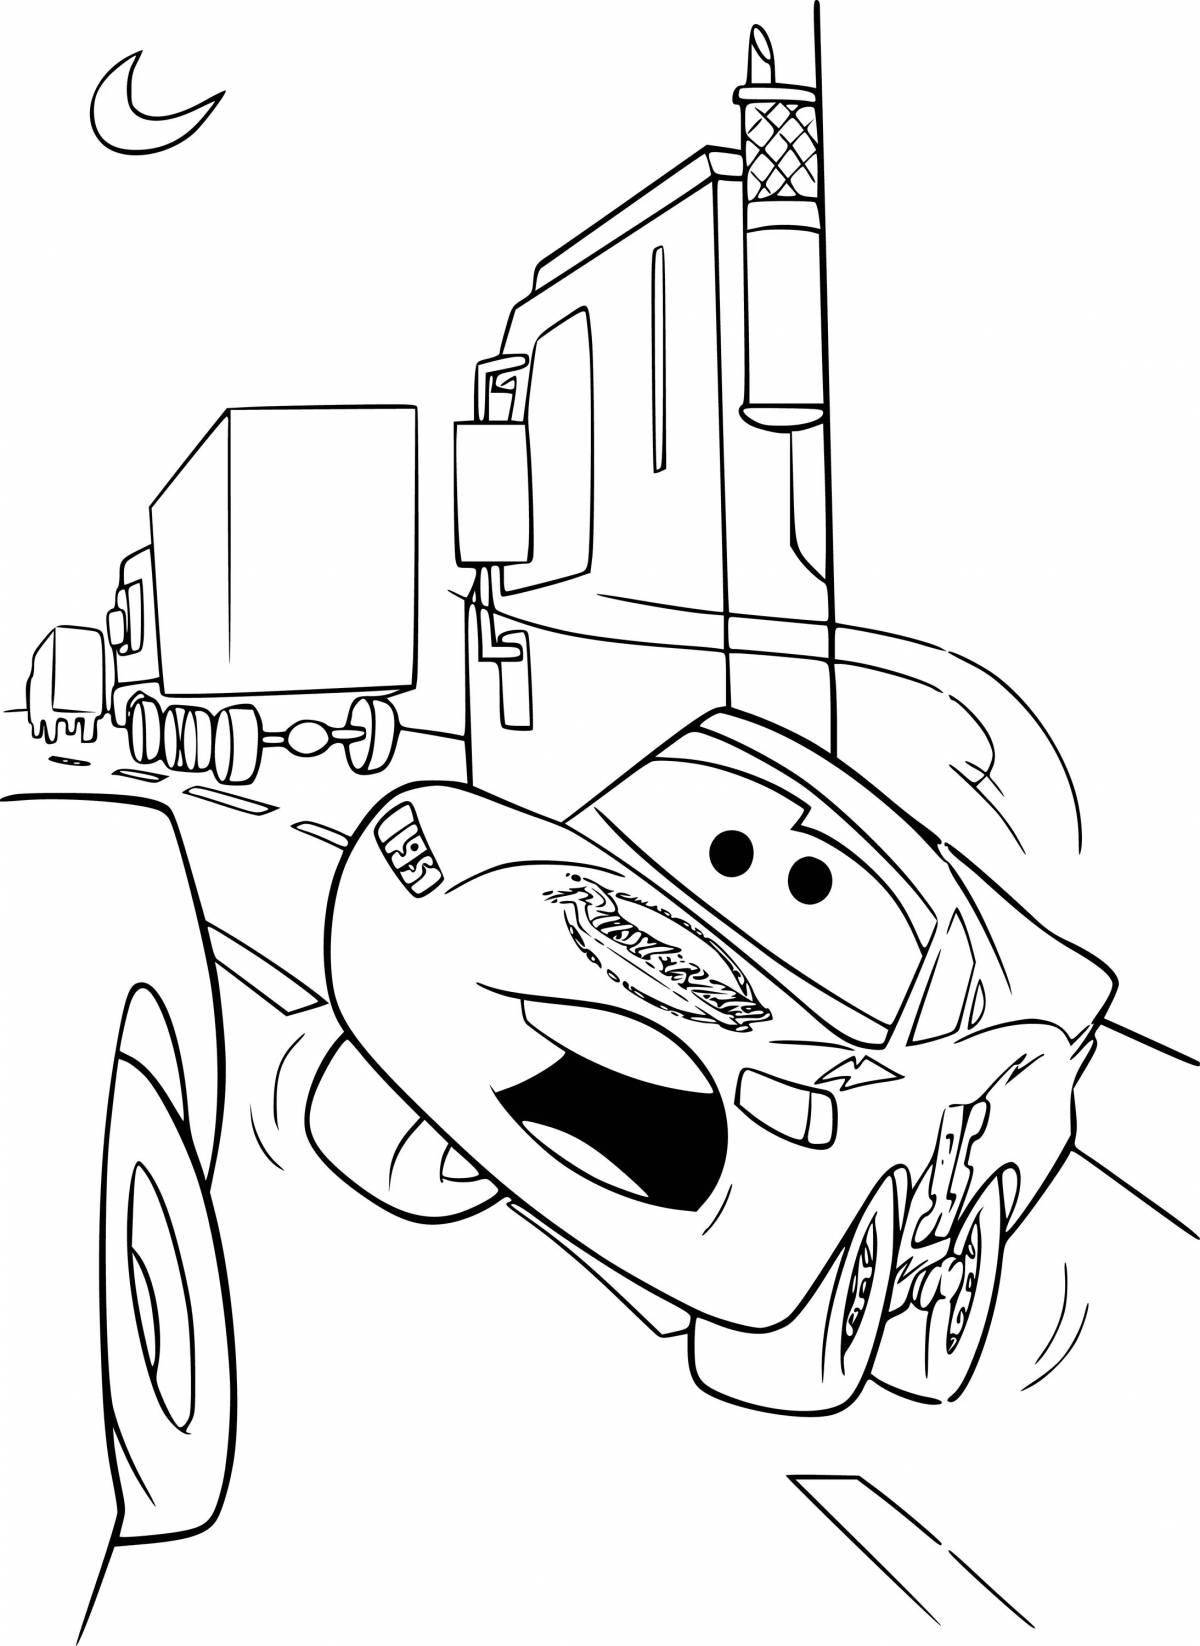 Adorable poppy cars coloring page